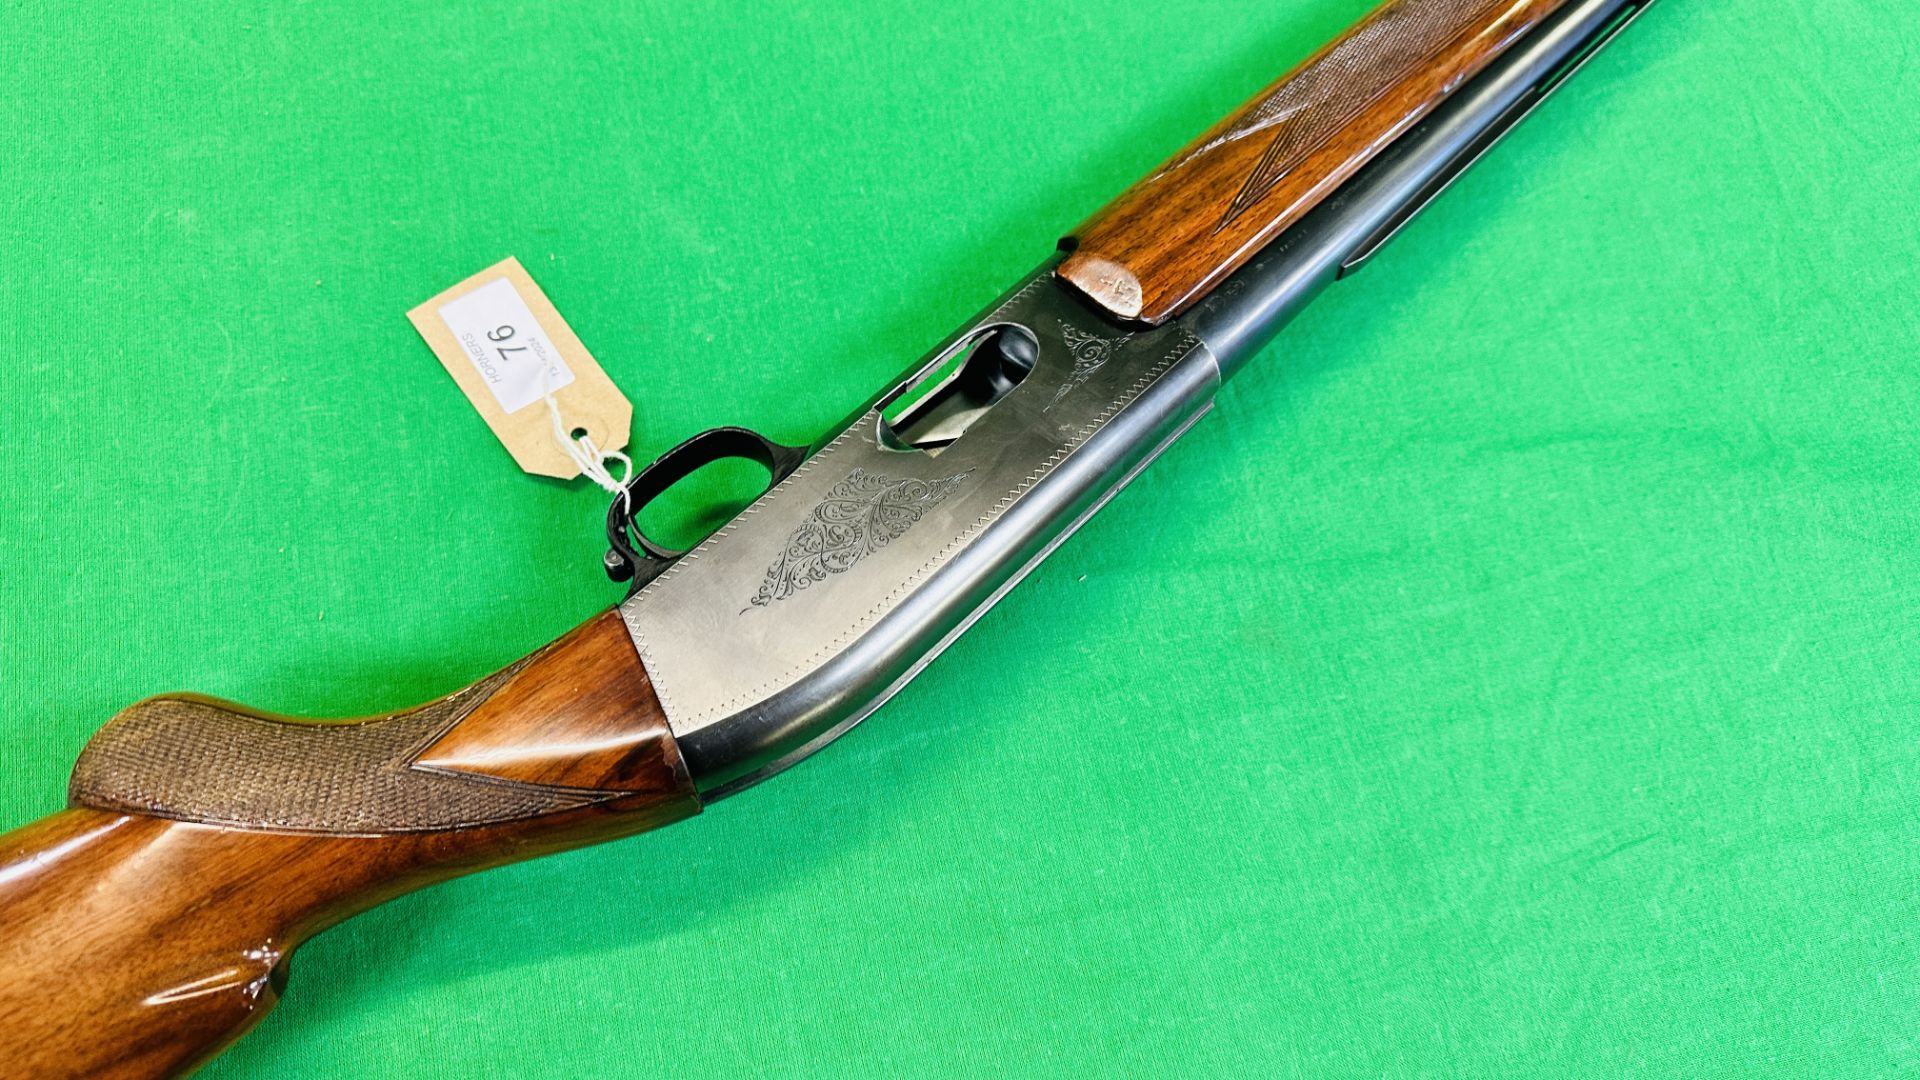 FABRIQUE 12 BORE SELF LOADING TWO SHOT SHOTGUN MODEL "DOUBLE TWO" #C23651 29 INCH BARREL VENTILATED - Image 10 of 15